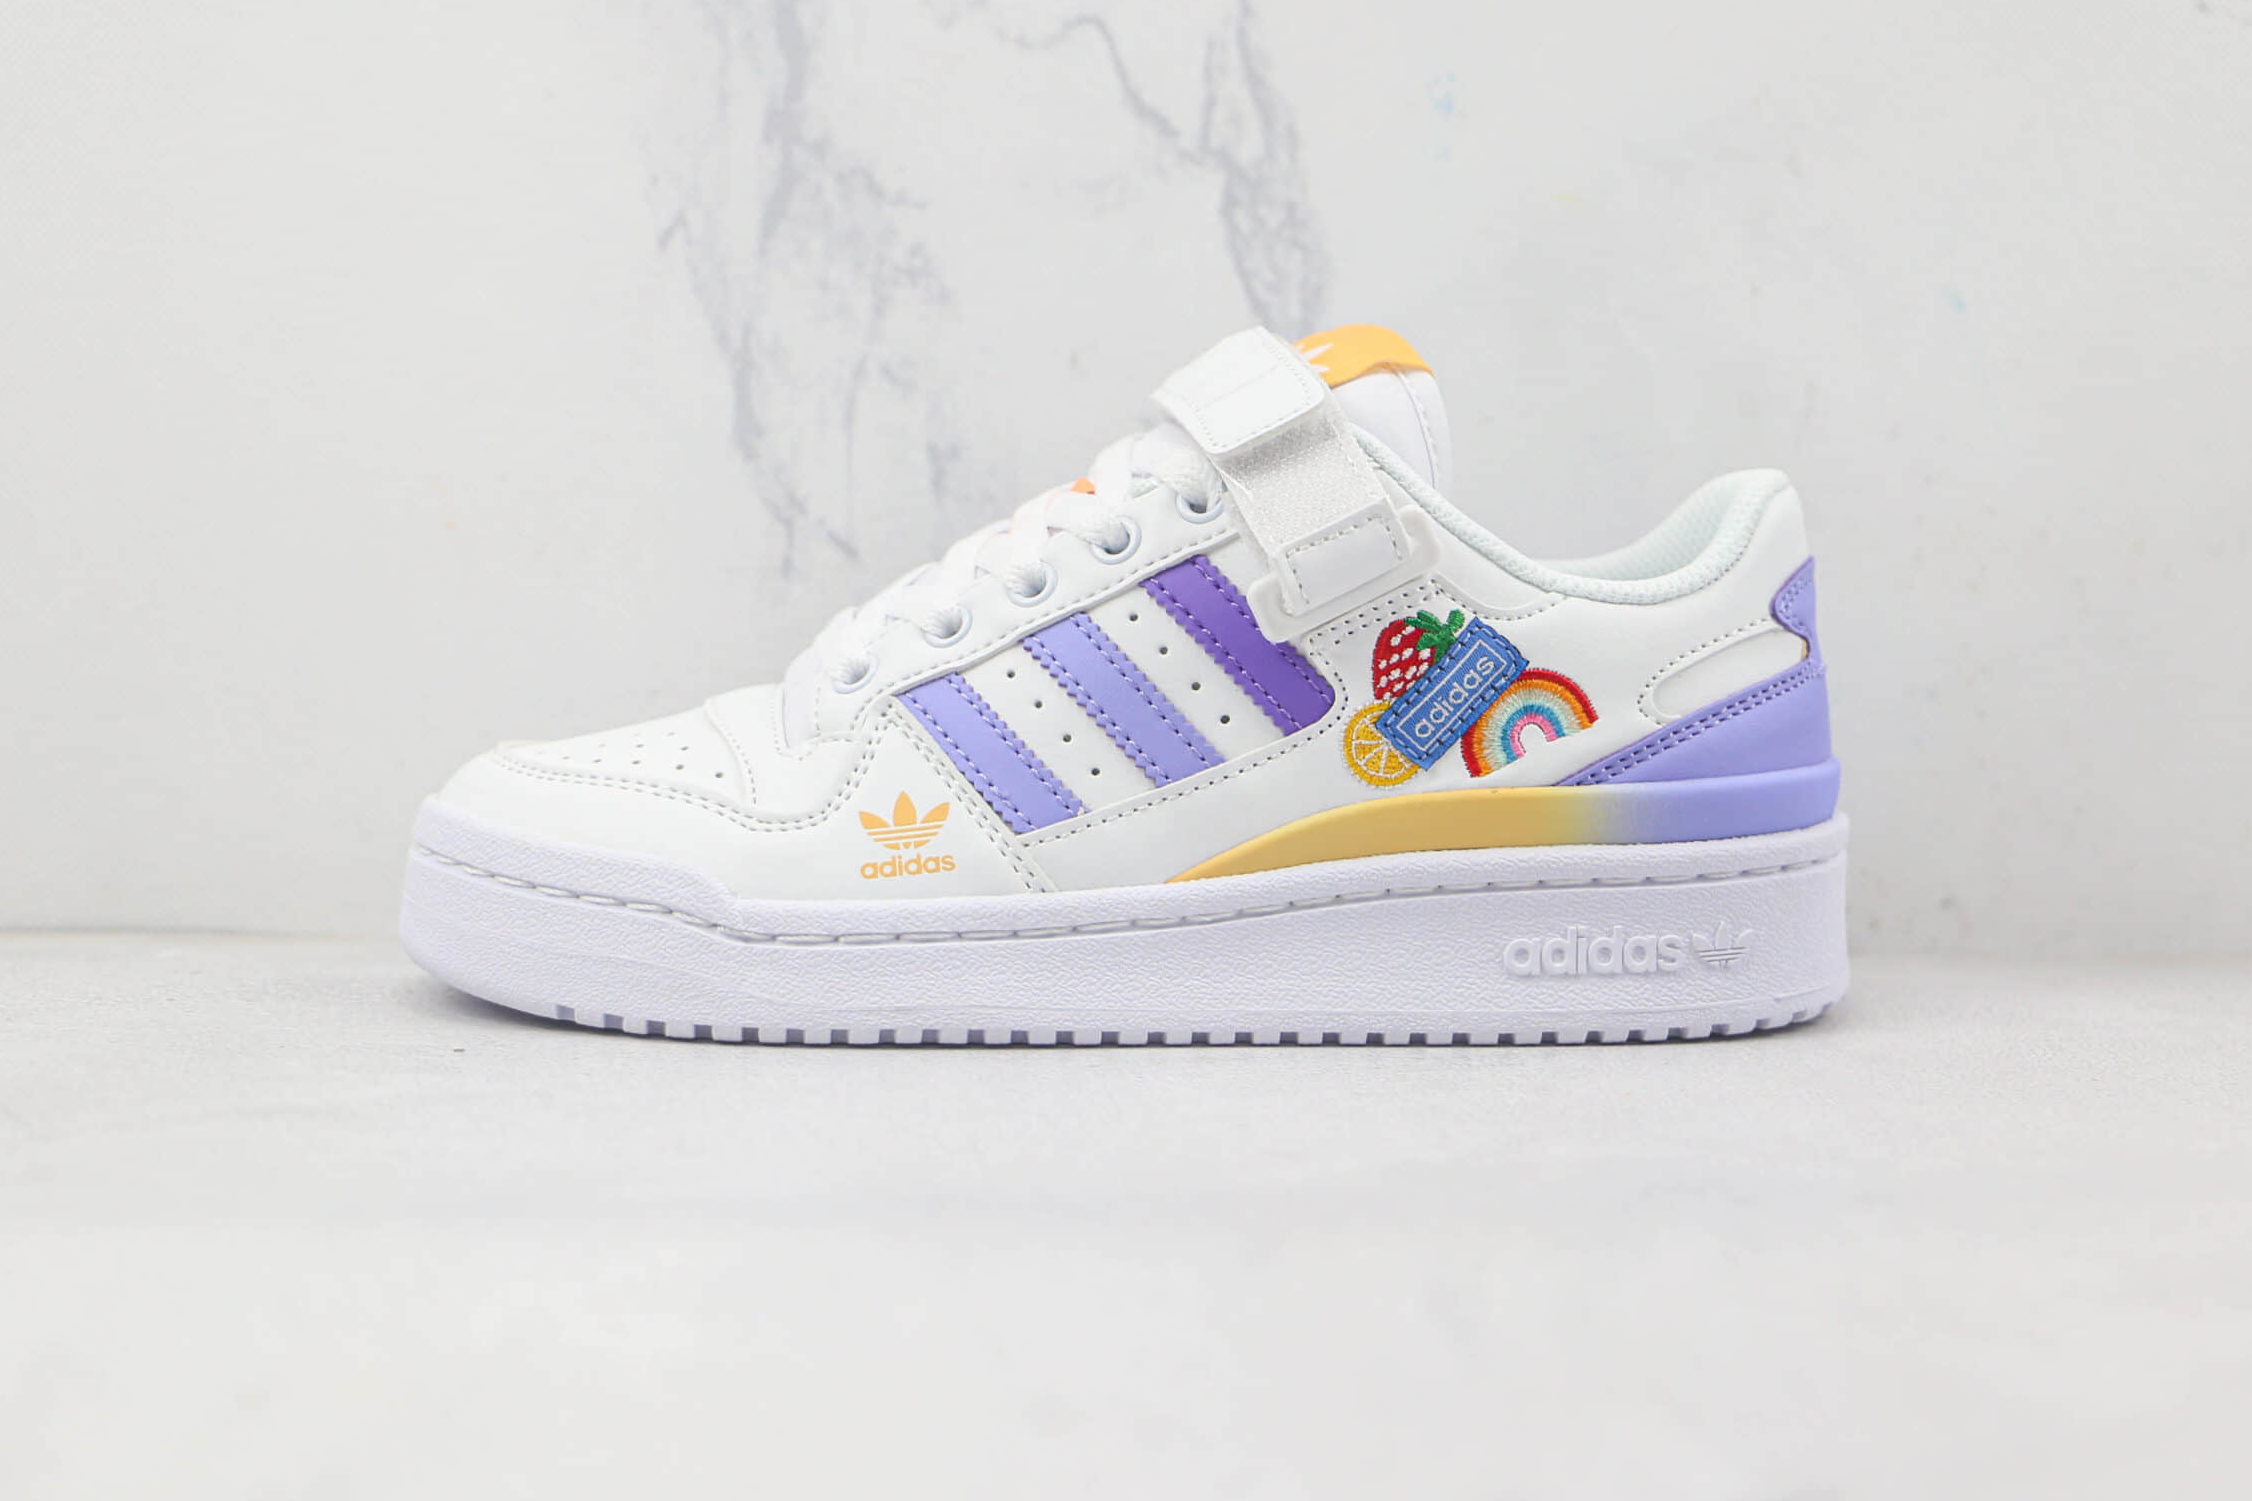 Adidas Forum Low J White Light Purple GY8209 - Stylish and Comfortable Sneakers